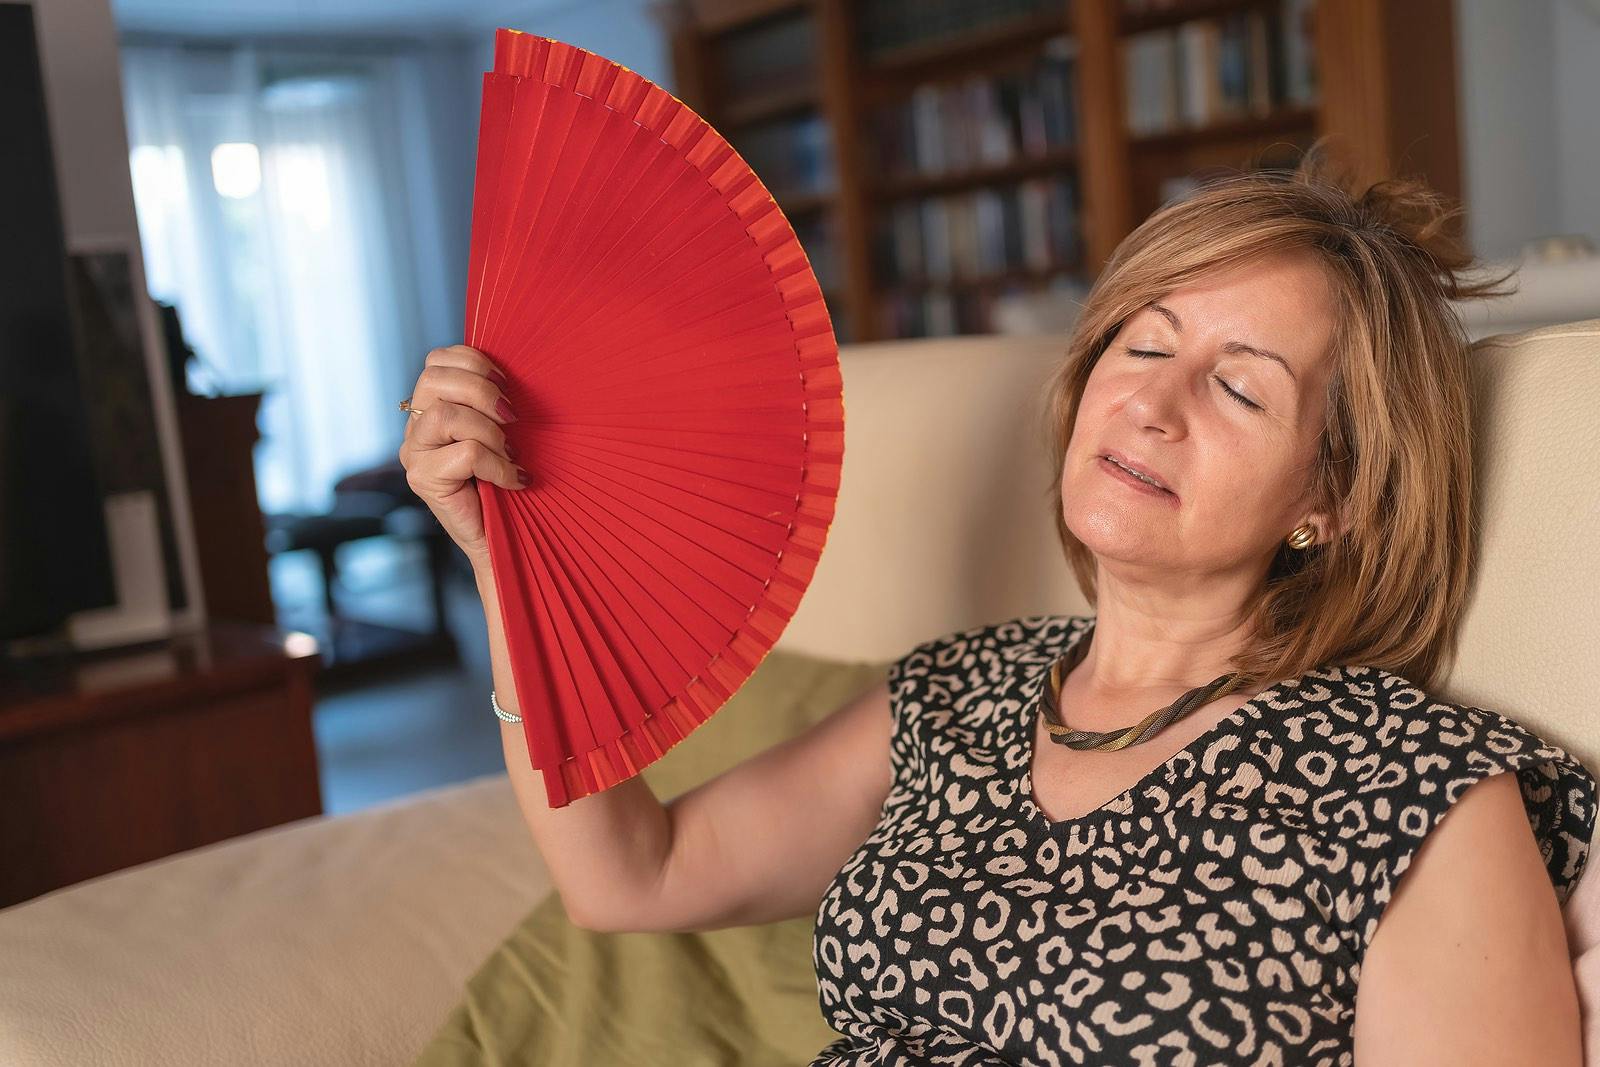 woman with a fan experiencing hot flashes and other menopausal symptoms